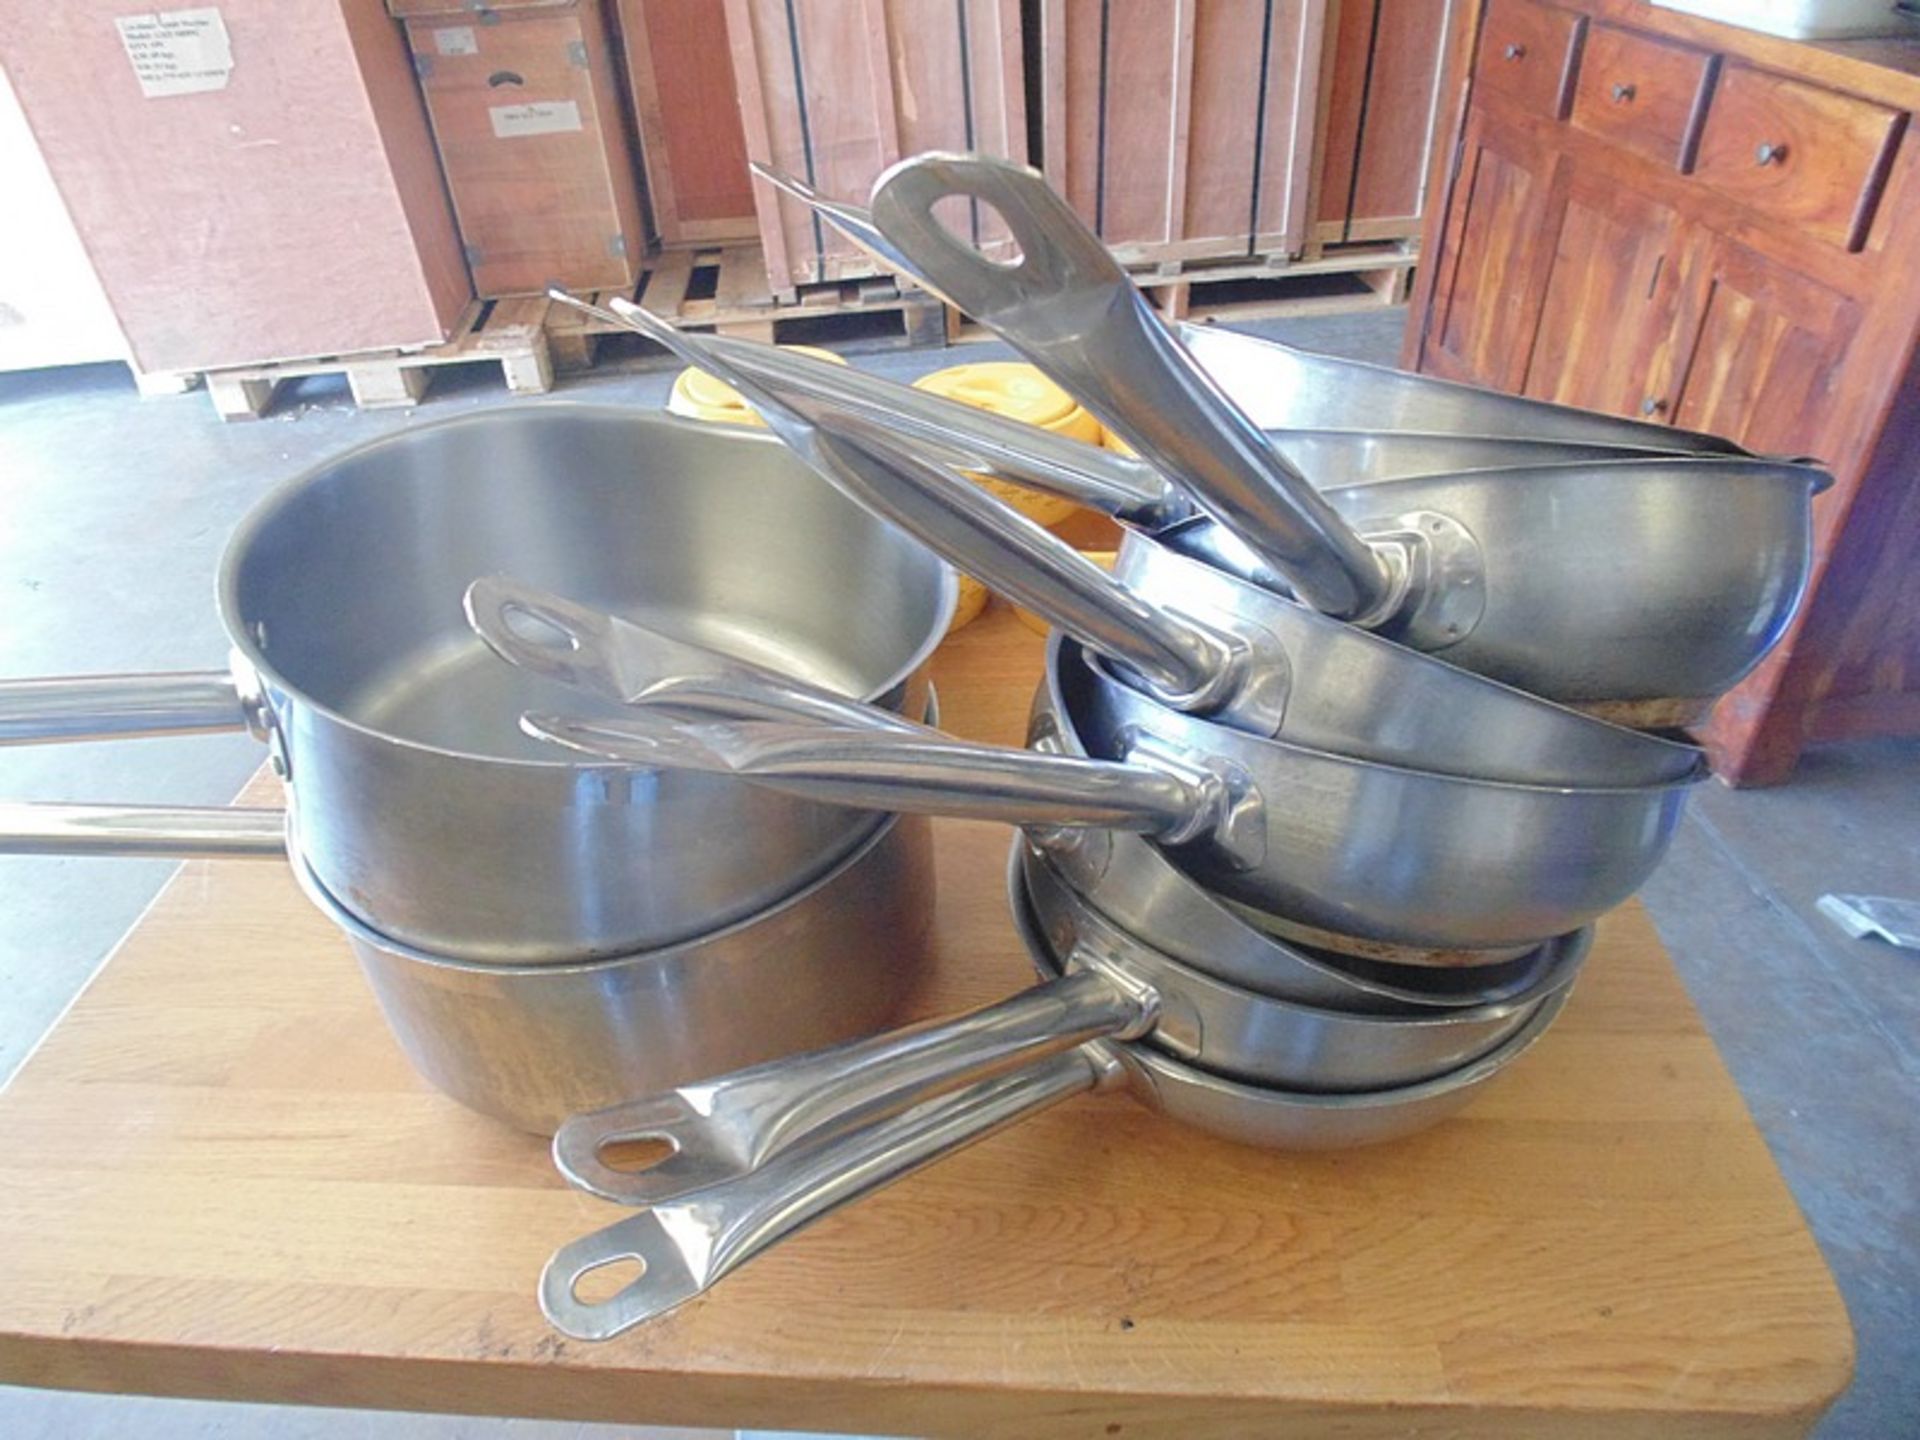 2 x Genware stainless steel 260mm saucepans and 8 x Vogue 220mm stainless steel saucepans